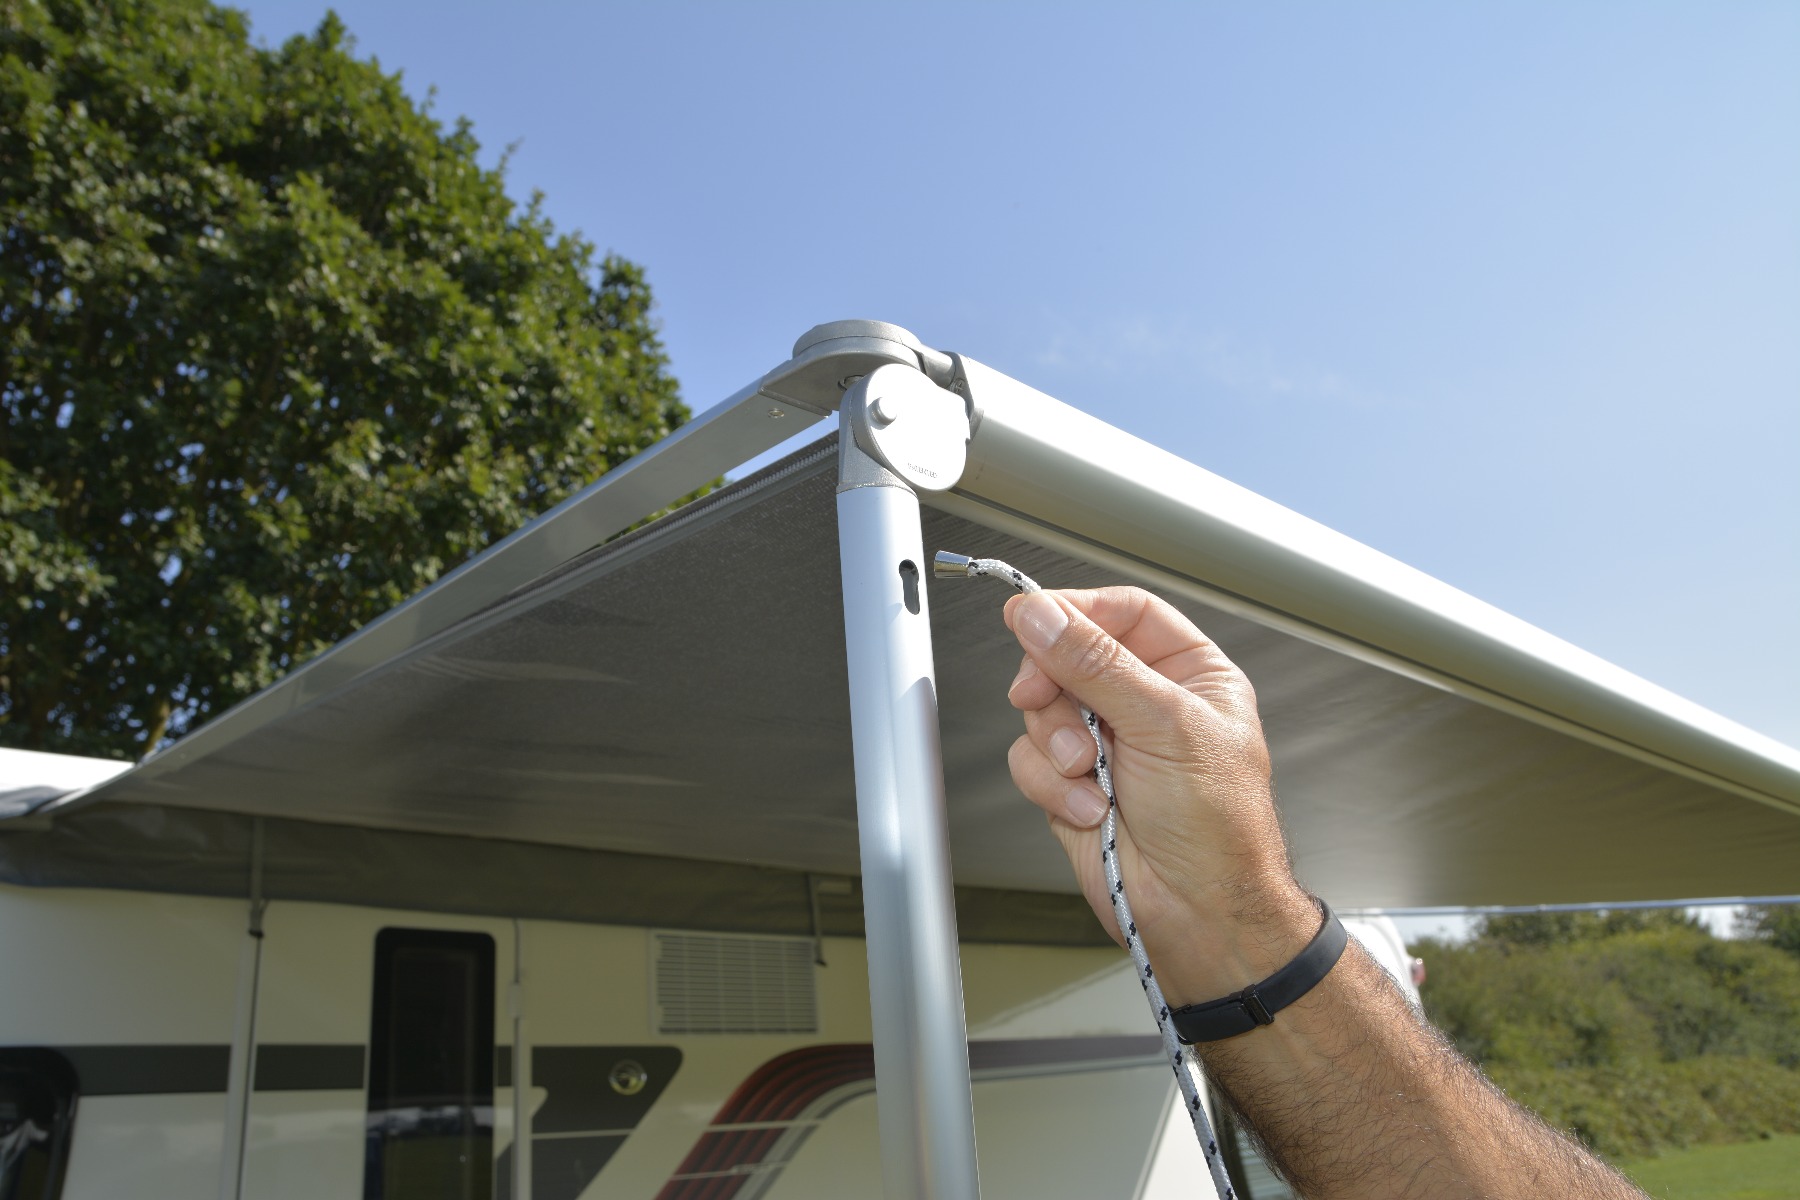 How To Attach An Awning To A Camper